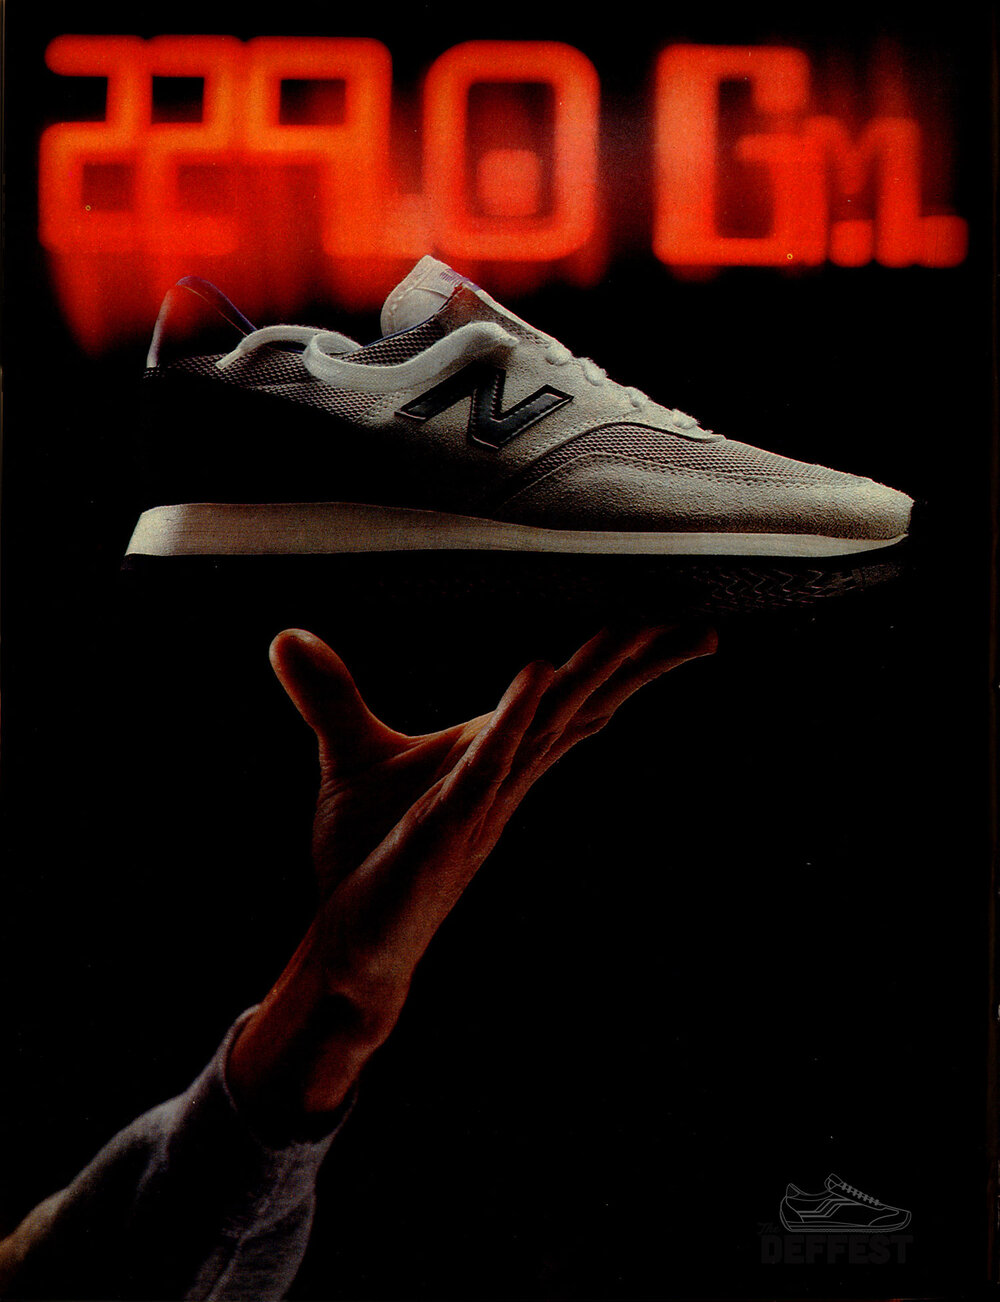 new balance sneakers — The Deffest®. A vintage and retro sneaker ...